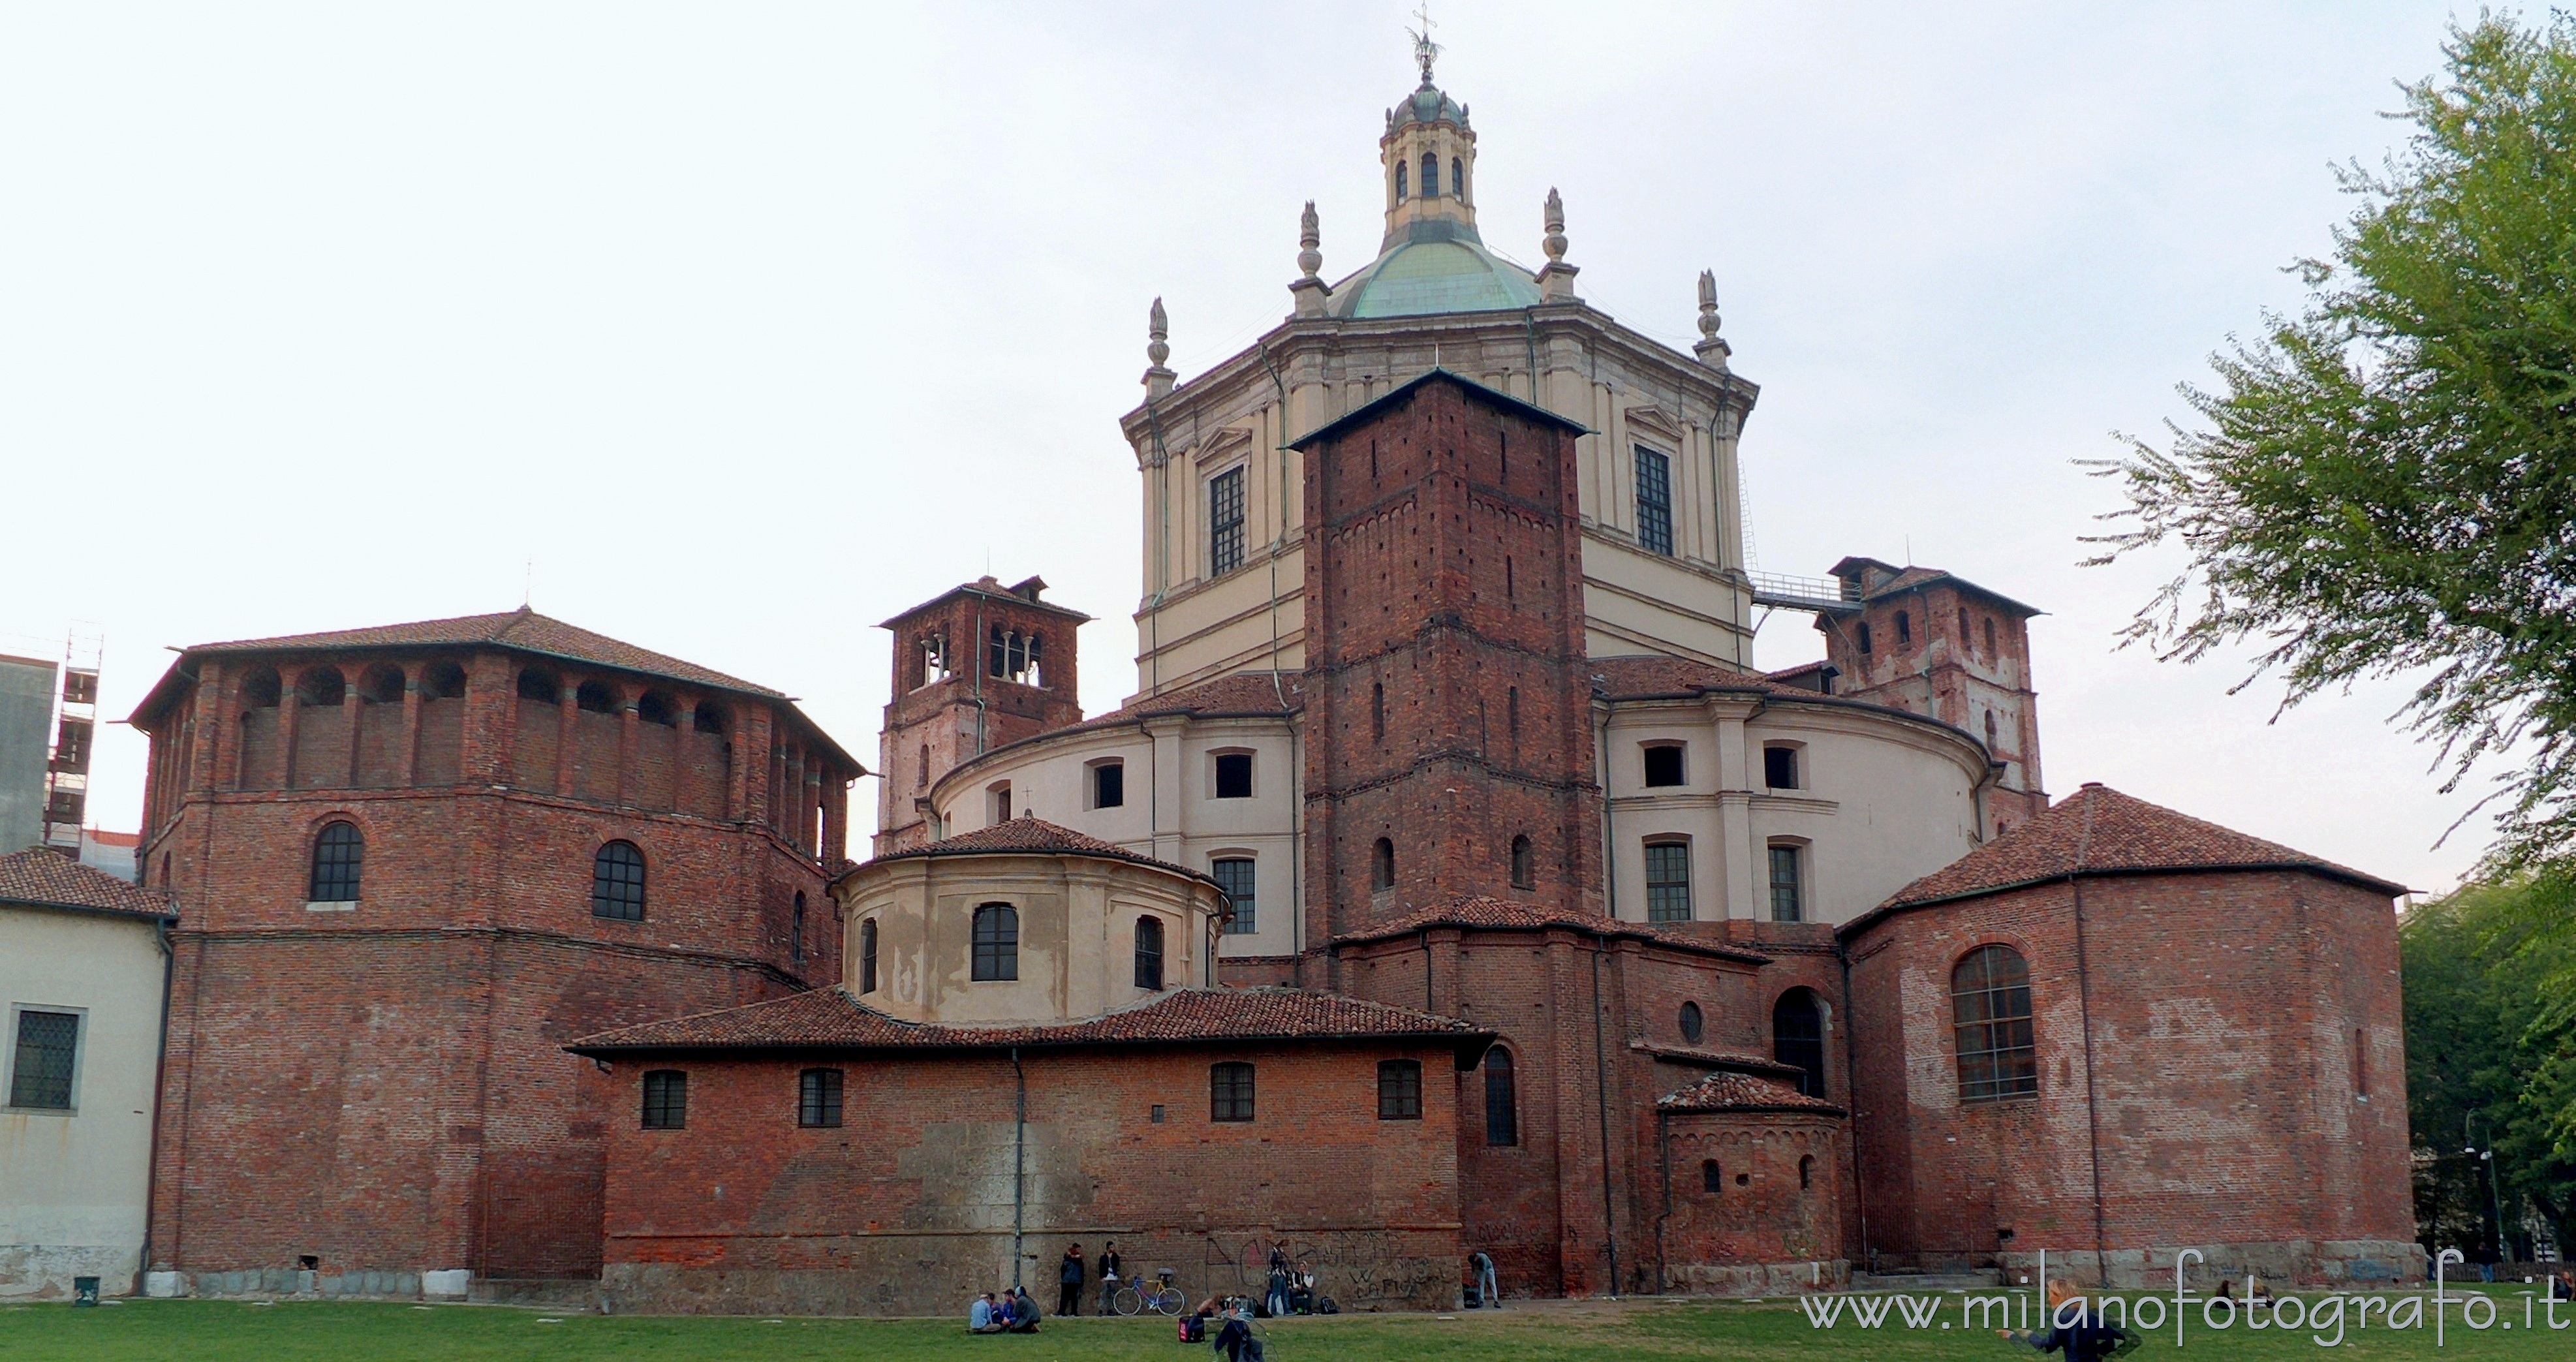 Milan (Italy): Back side of the complex of the Basilica of San Lorenzo Maggiore - Milan (Italy)